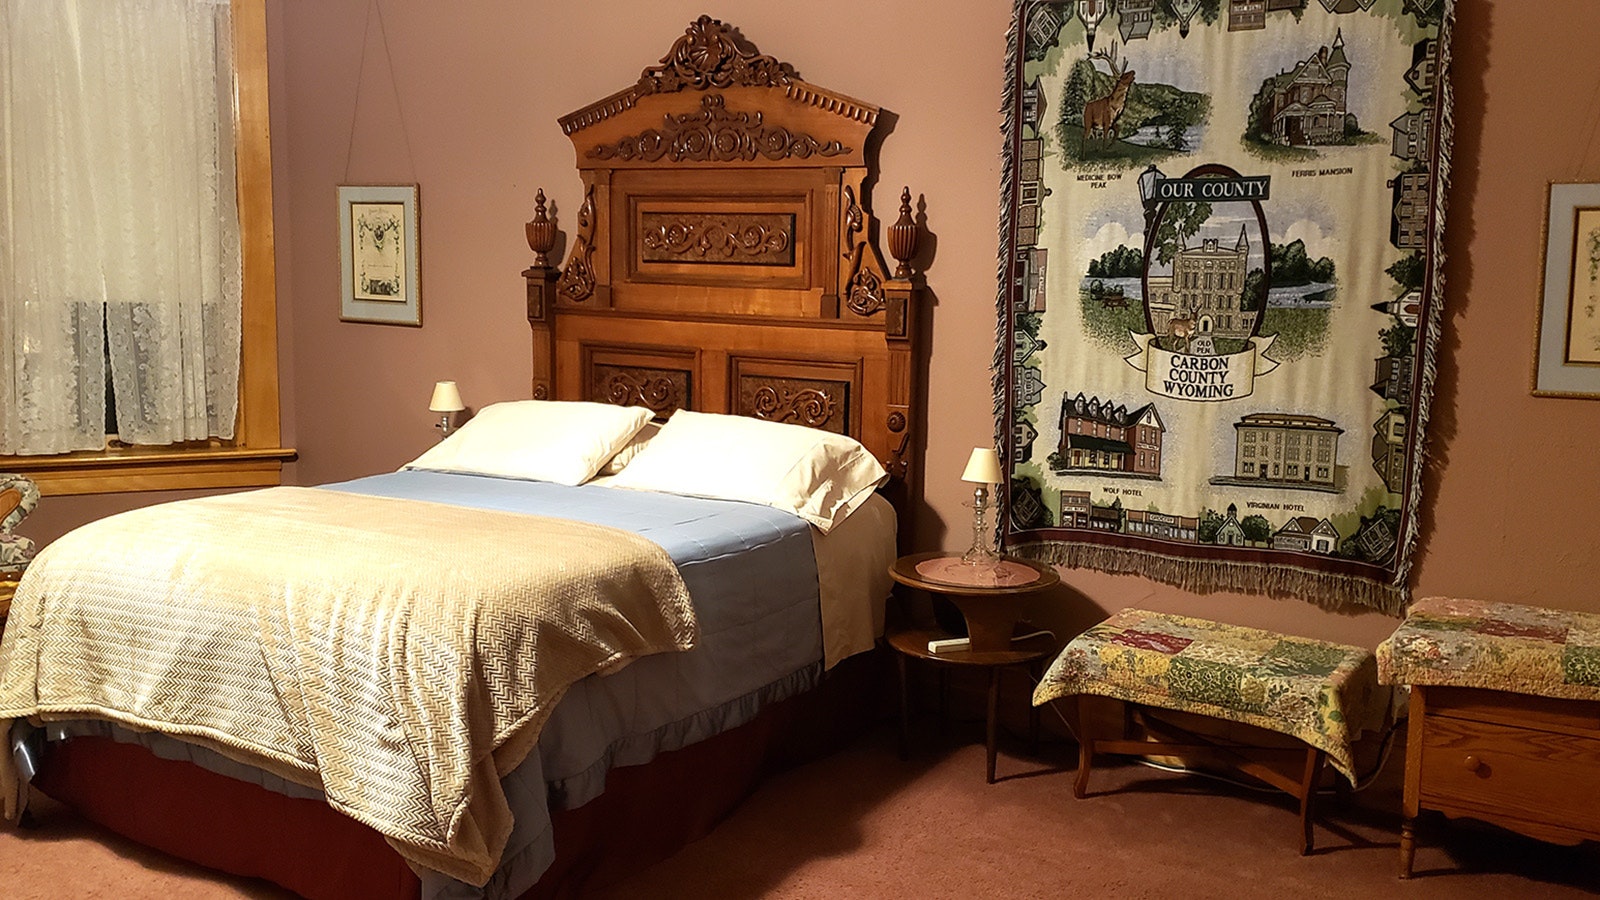 The Rose Room features a large bed with a wall hanging celebrating Carbon County. The Ferris Mansion is one of the buildings portrayed on the wall hanging.